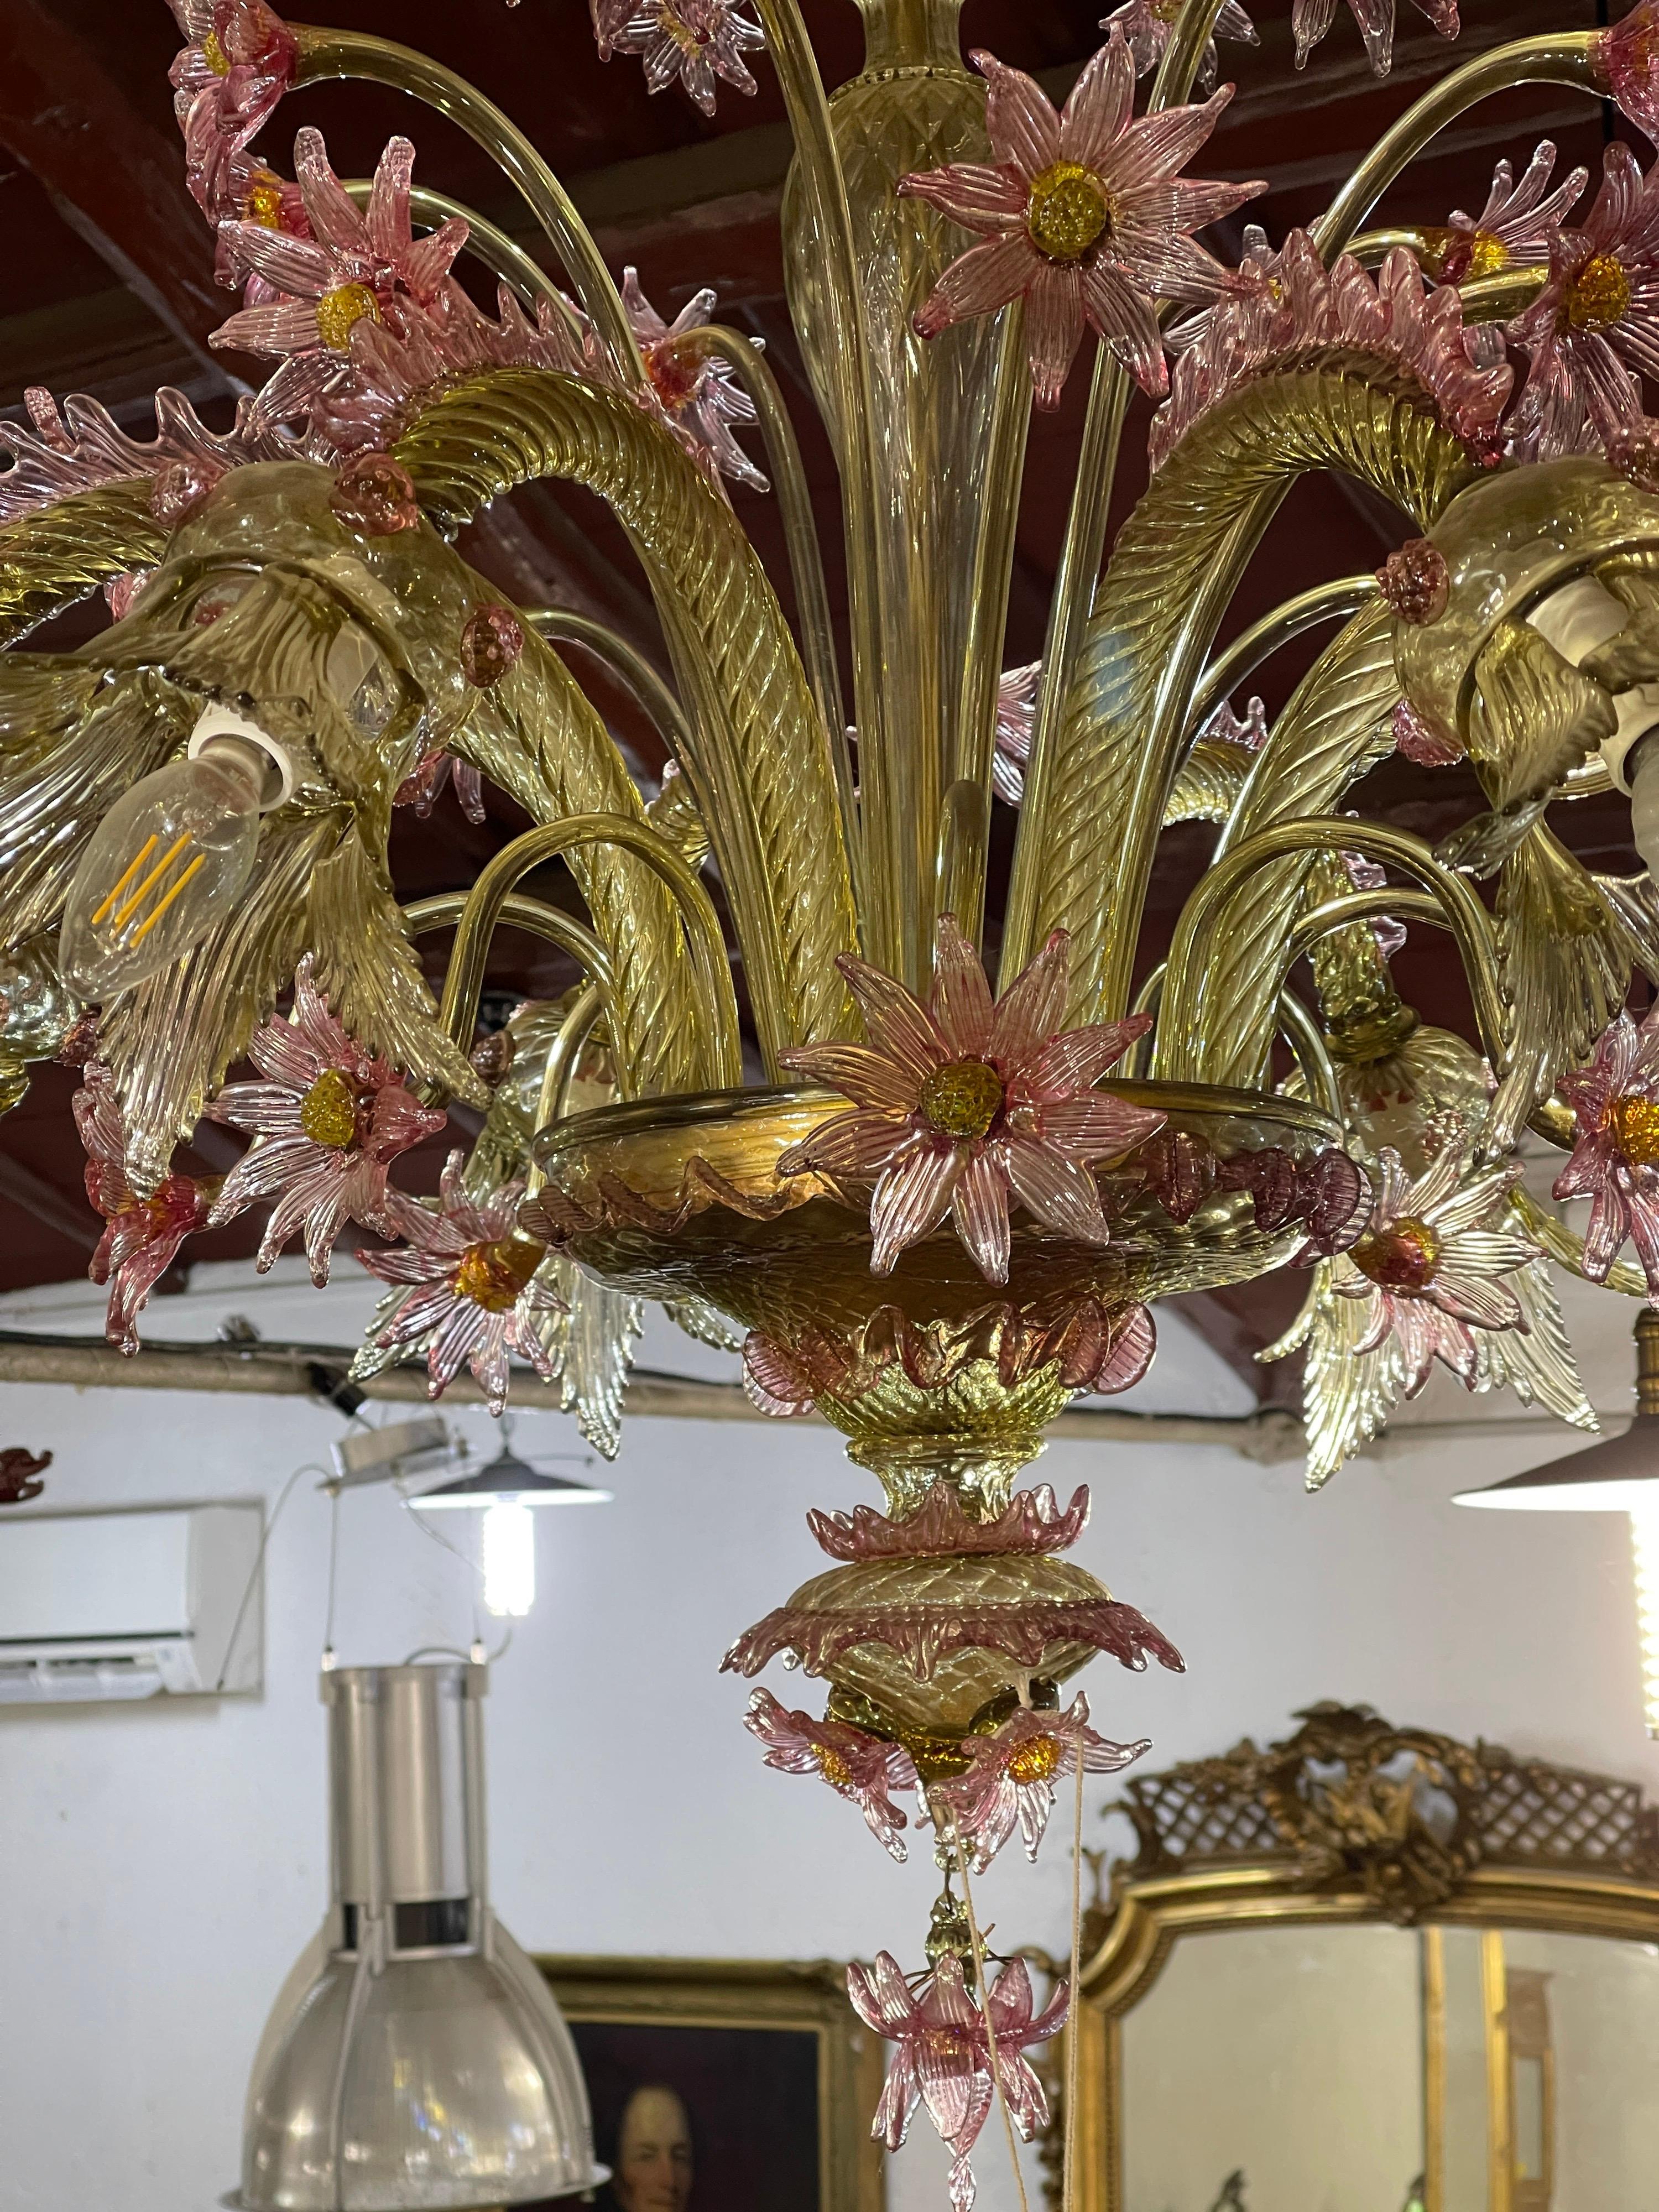 Italian Venetian chandelier, Murano, 1930 circa, 8 light, in good condition.
Rare colour and unusual position of the light arms, the lamps face downwards. It gives more light and takes on a more harmonious form.
There are only two small missing